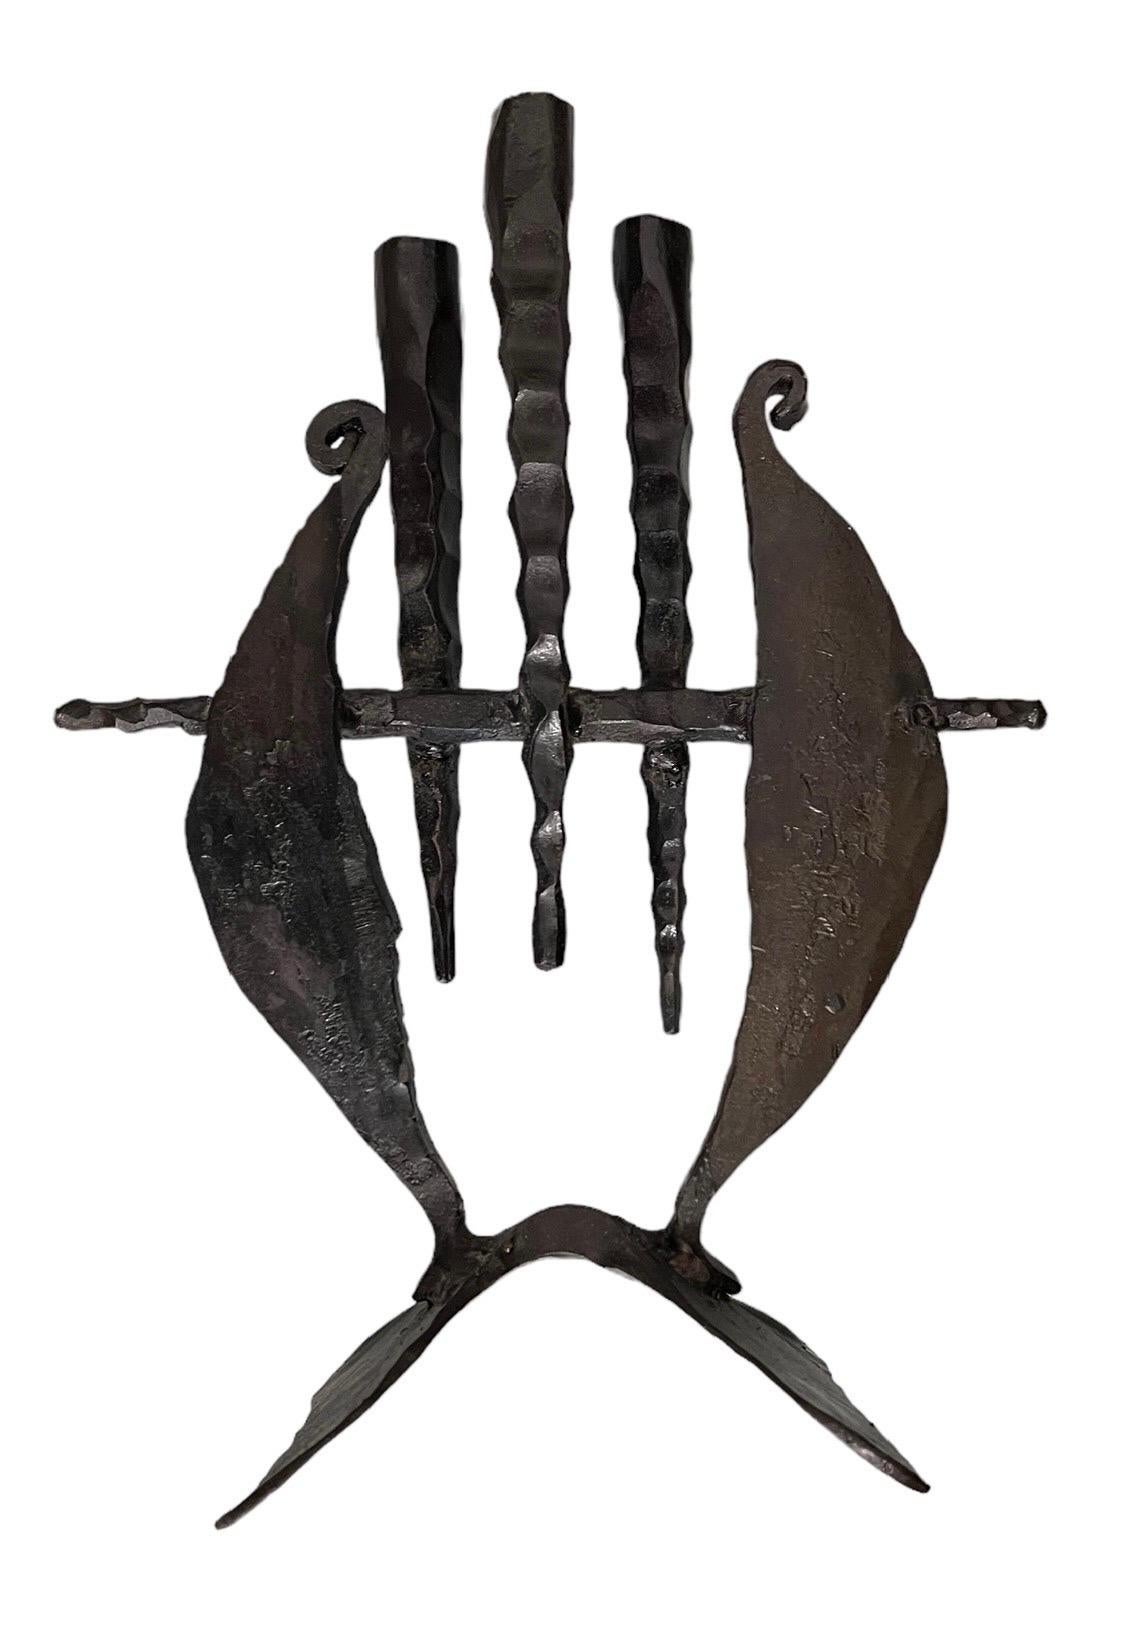 Hand Forged Iron Sconce Candelabra 
Holocaust Memorial Judaic table Sconce Sculpture


David Palombo was an Israeli sculptor and painter. He was born in Turkey to a traditional family and immigrated to the Land of Israel with his parents in 1923.